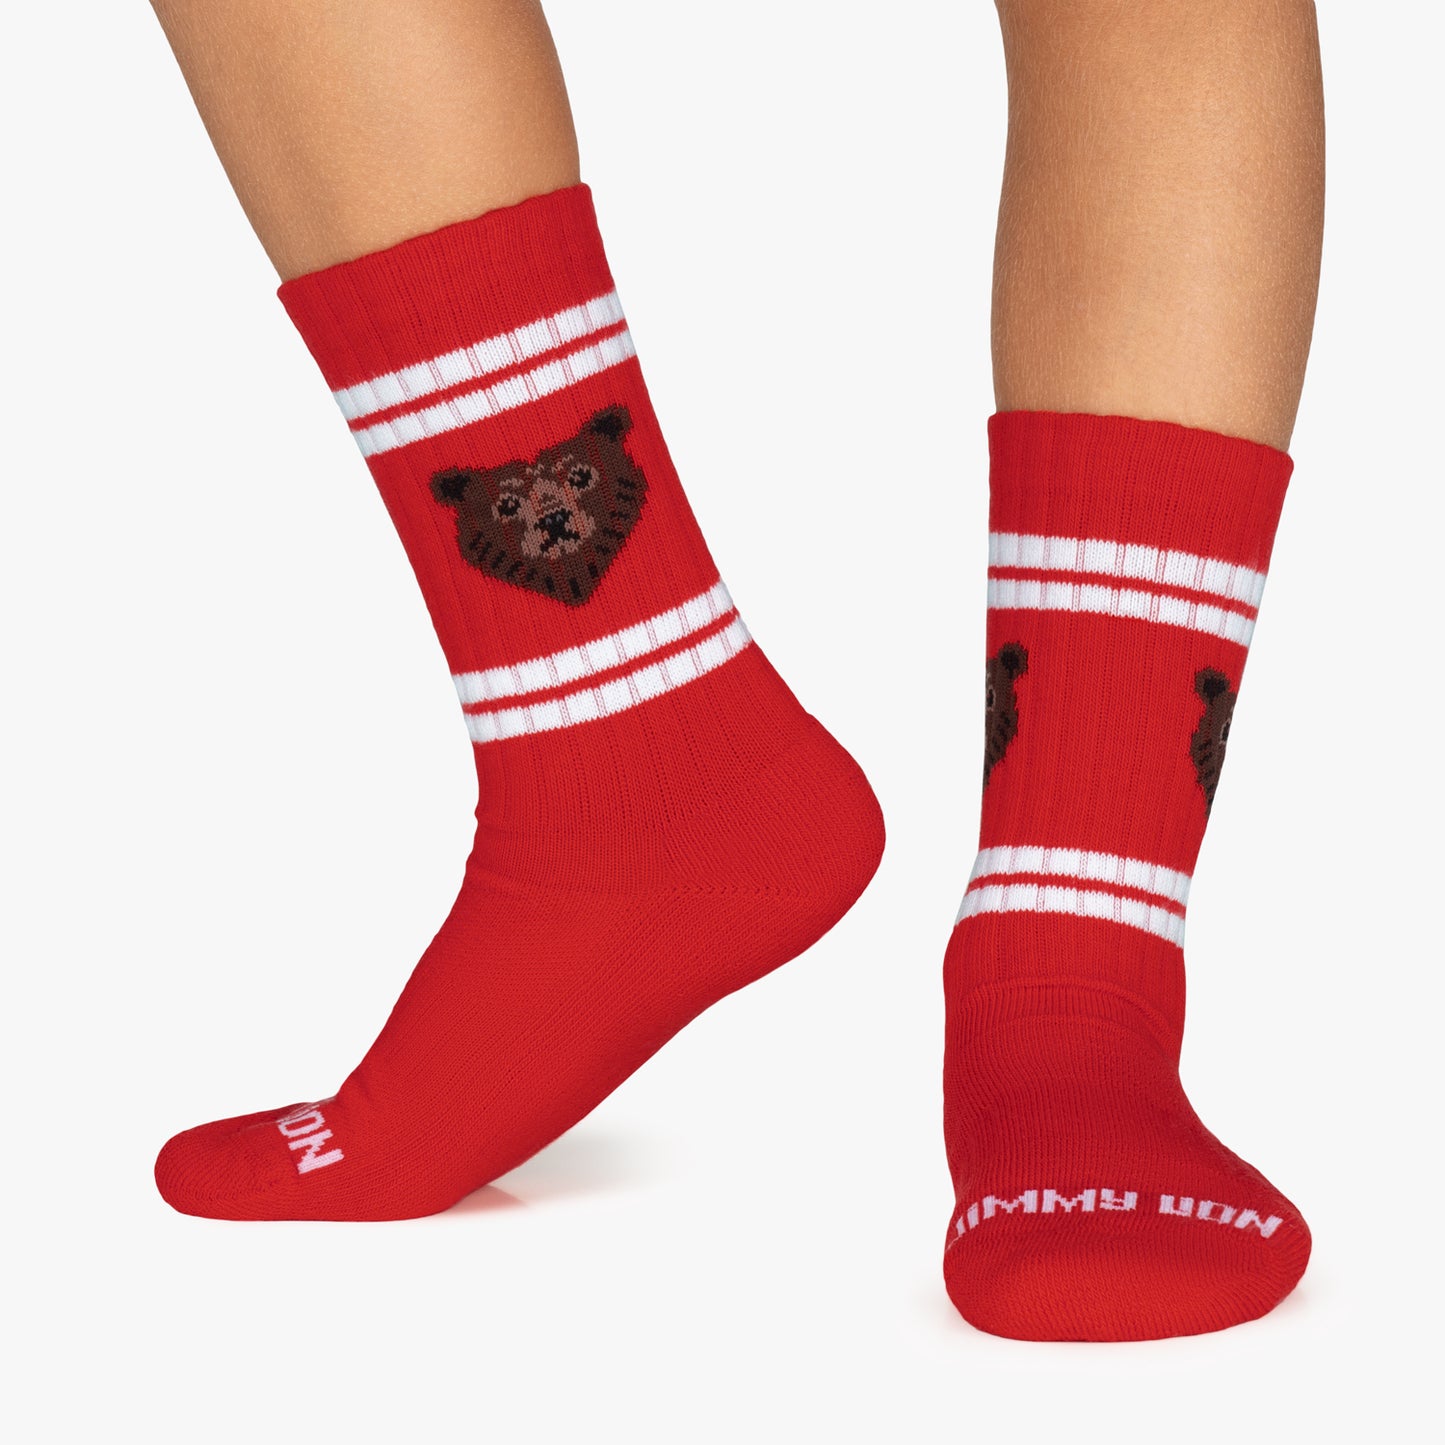 Kids Athletic Bear - Red (1)